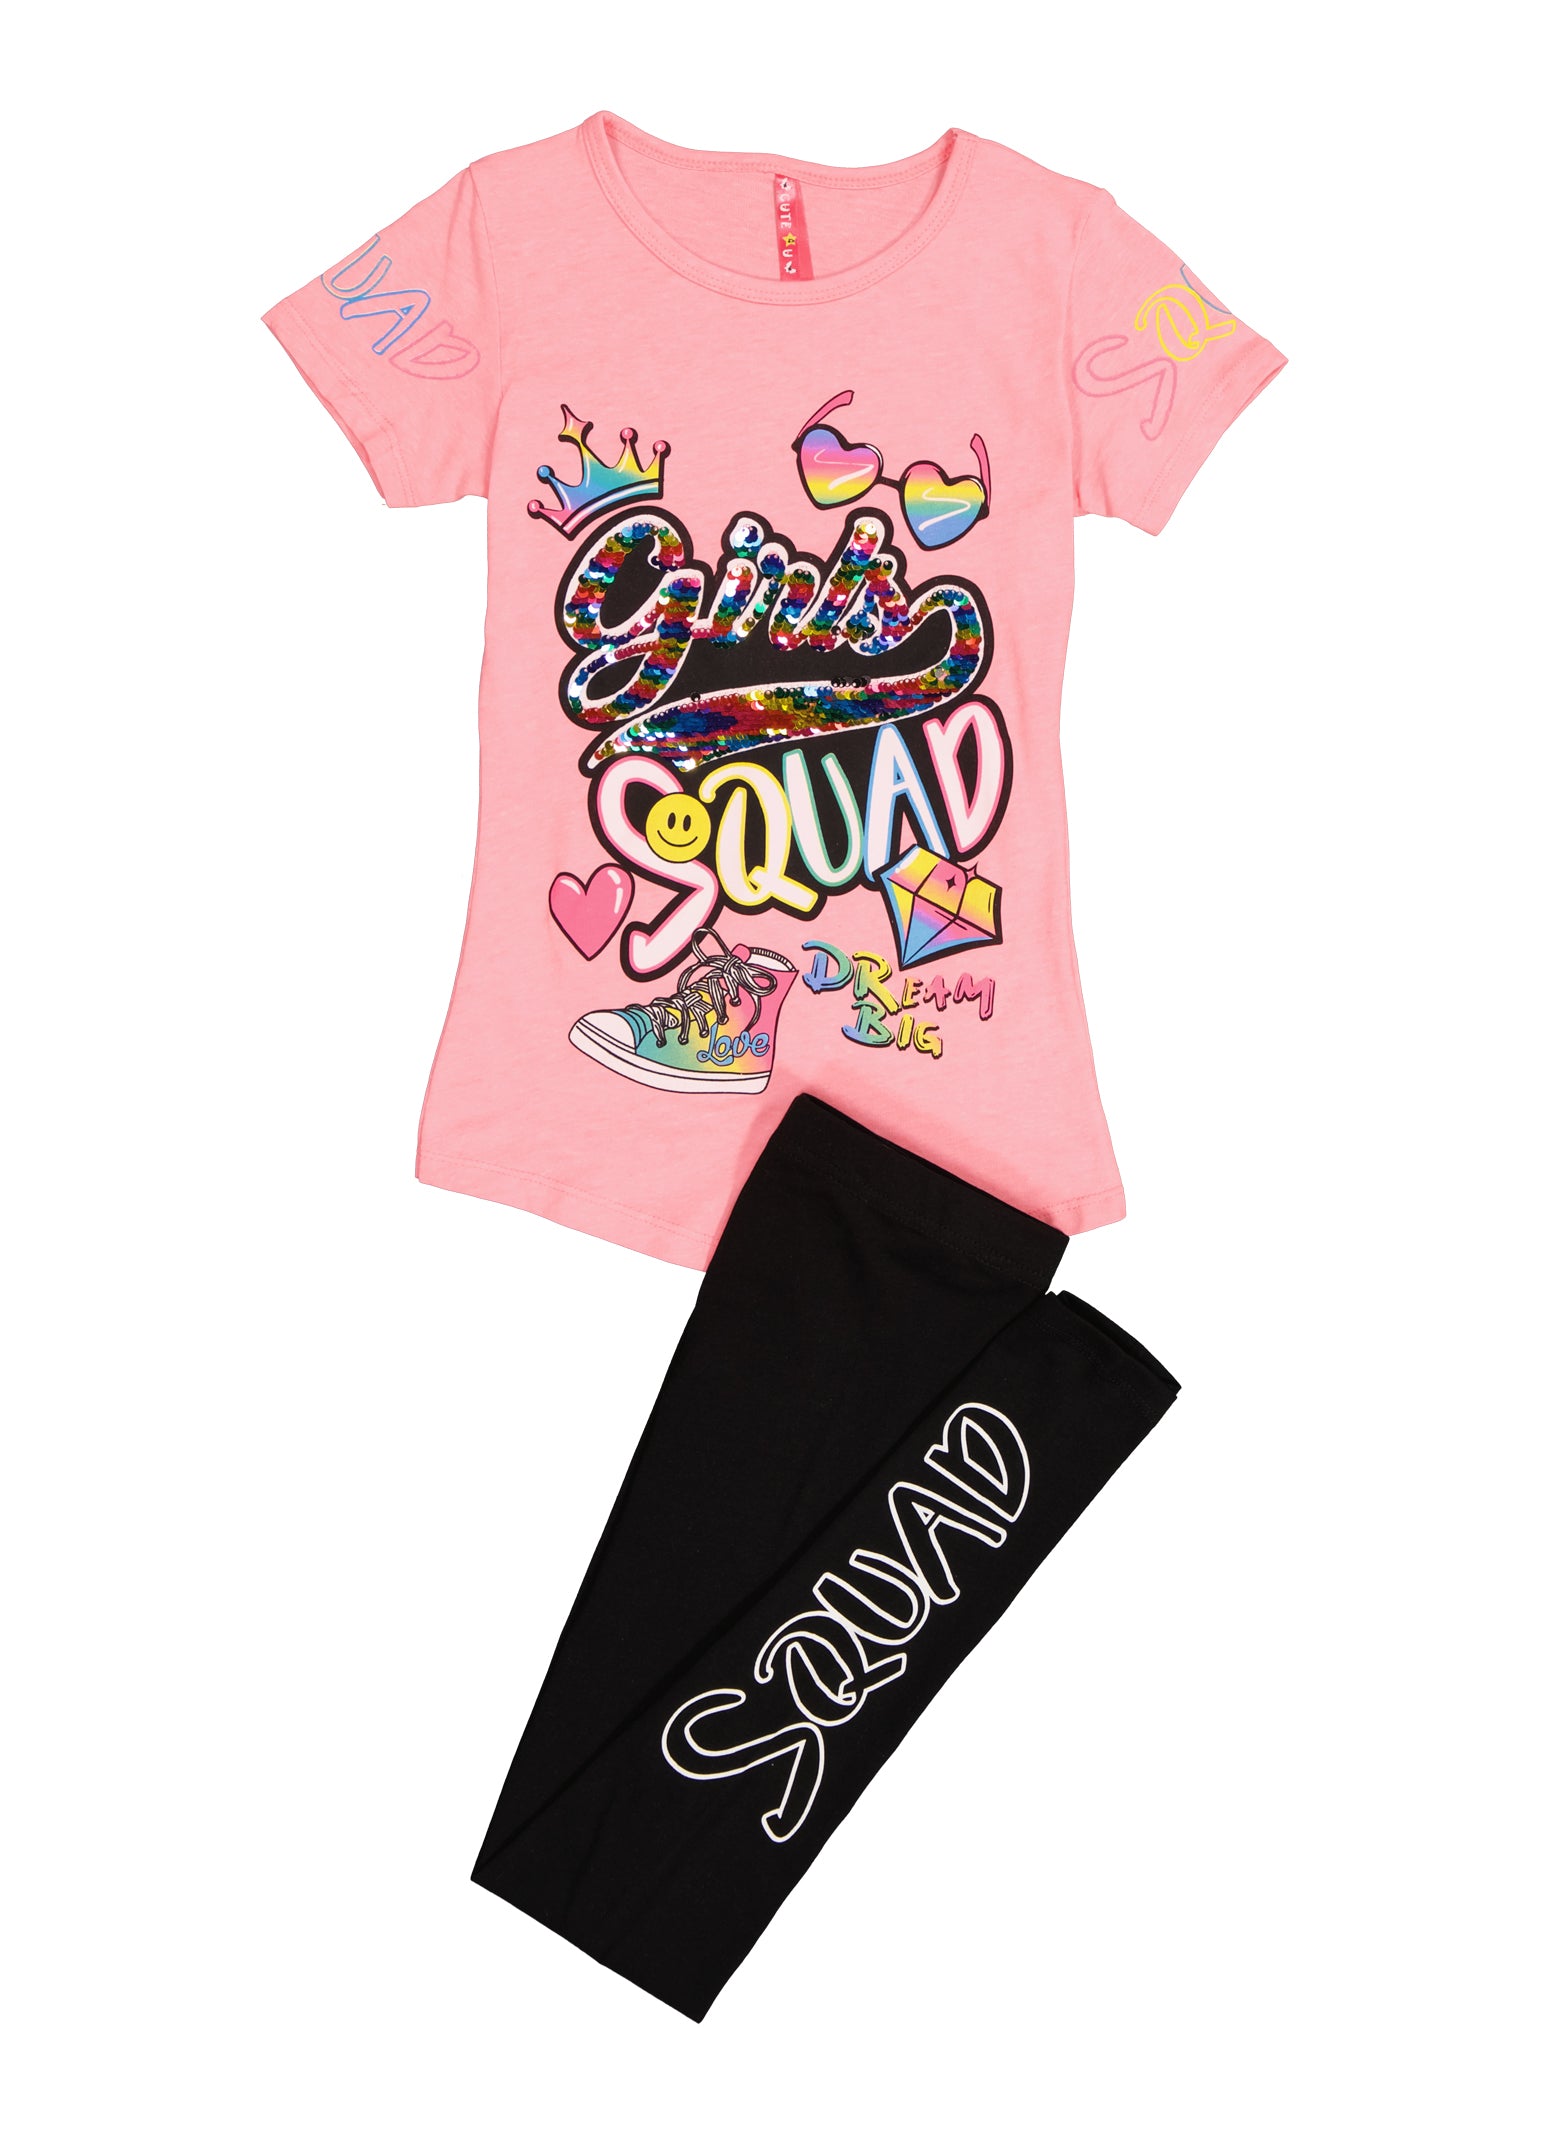 Girls Reversible Sequin Girls Squad Graphic Tee and Leggings, Pink, Size 14-16